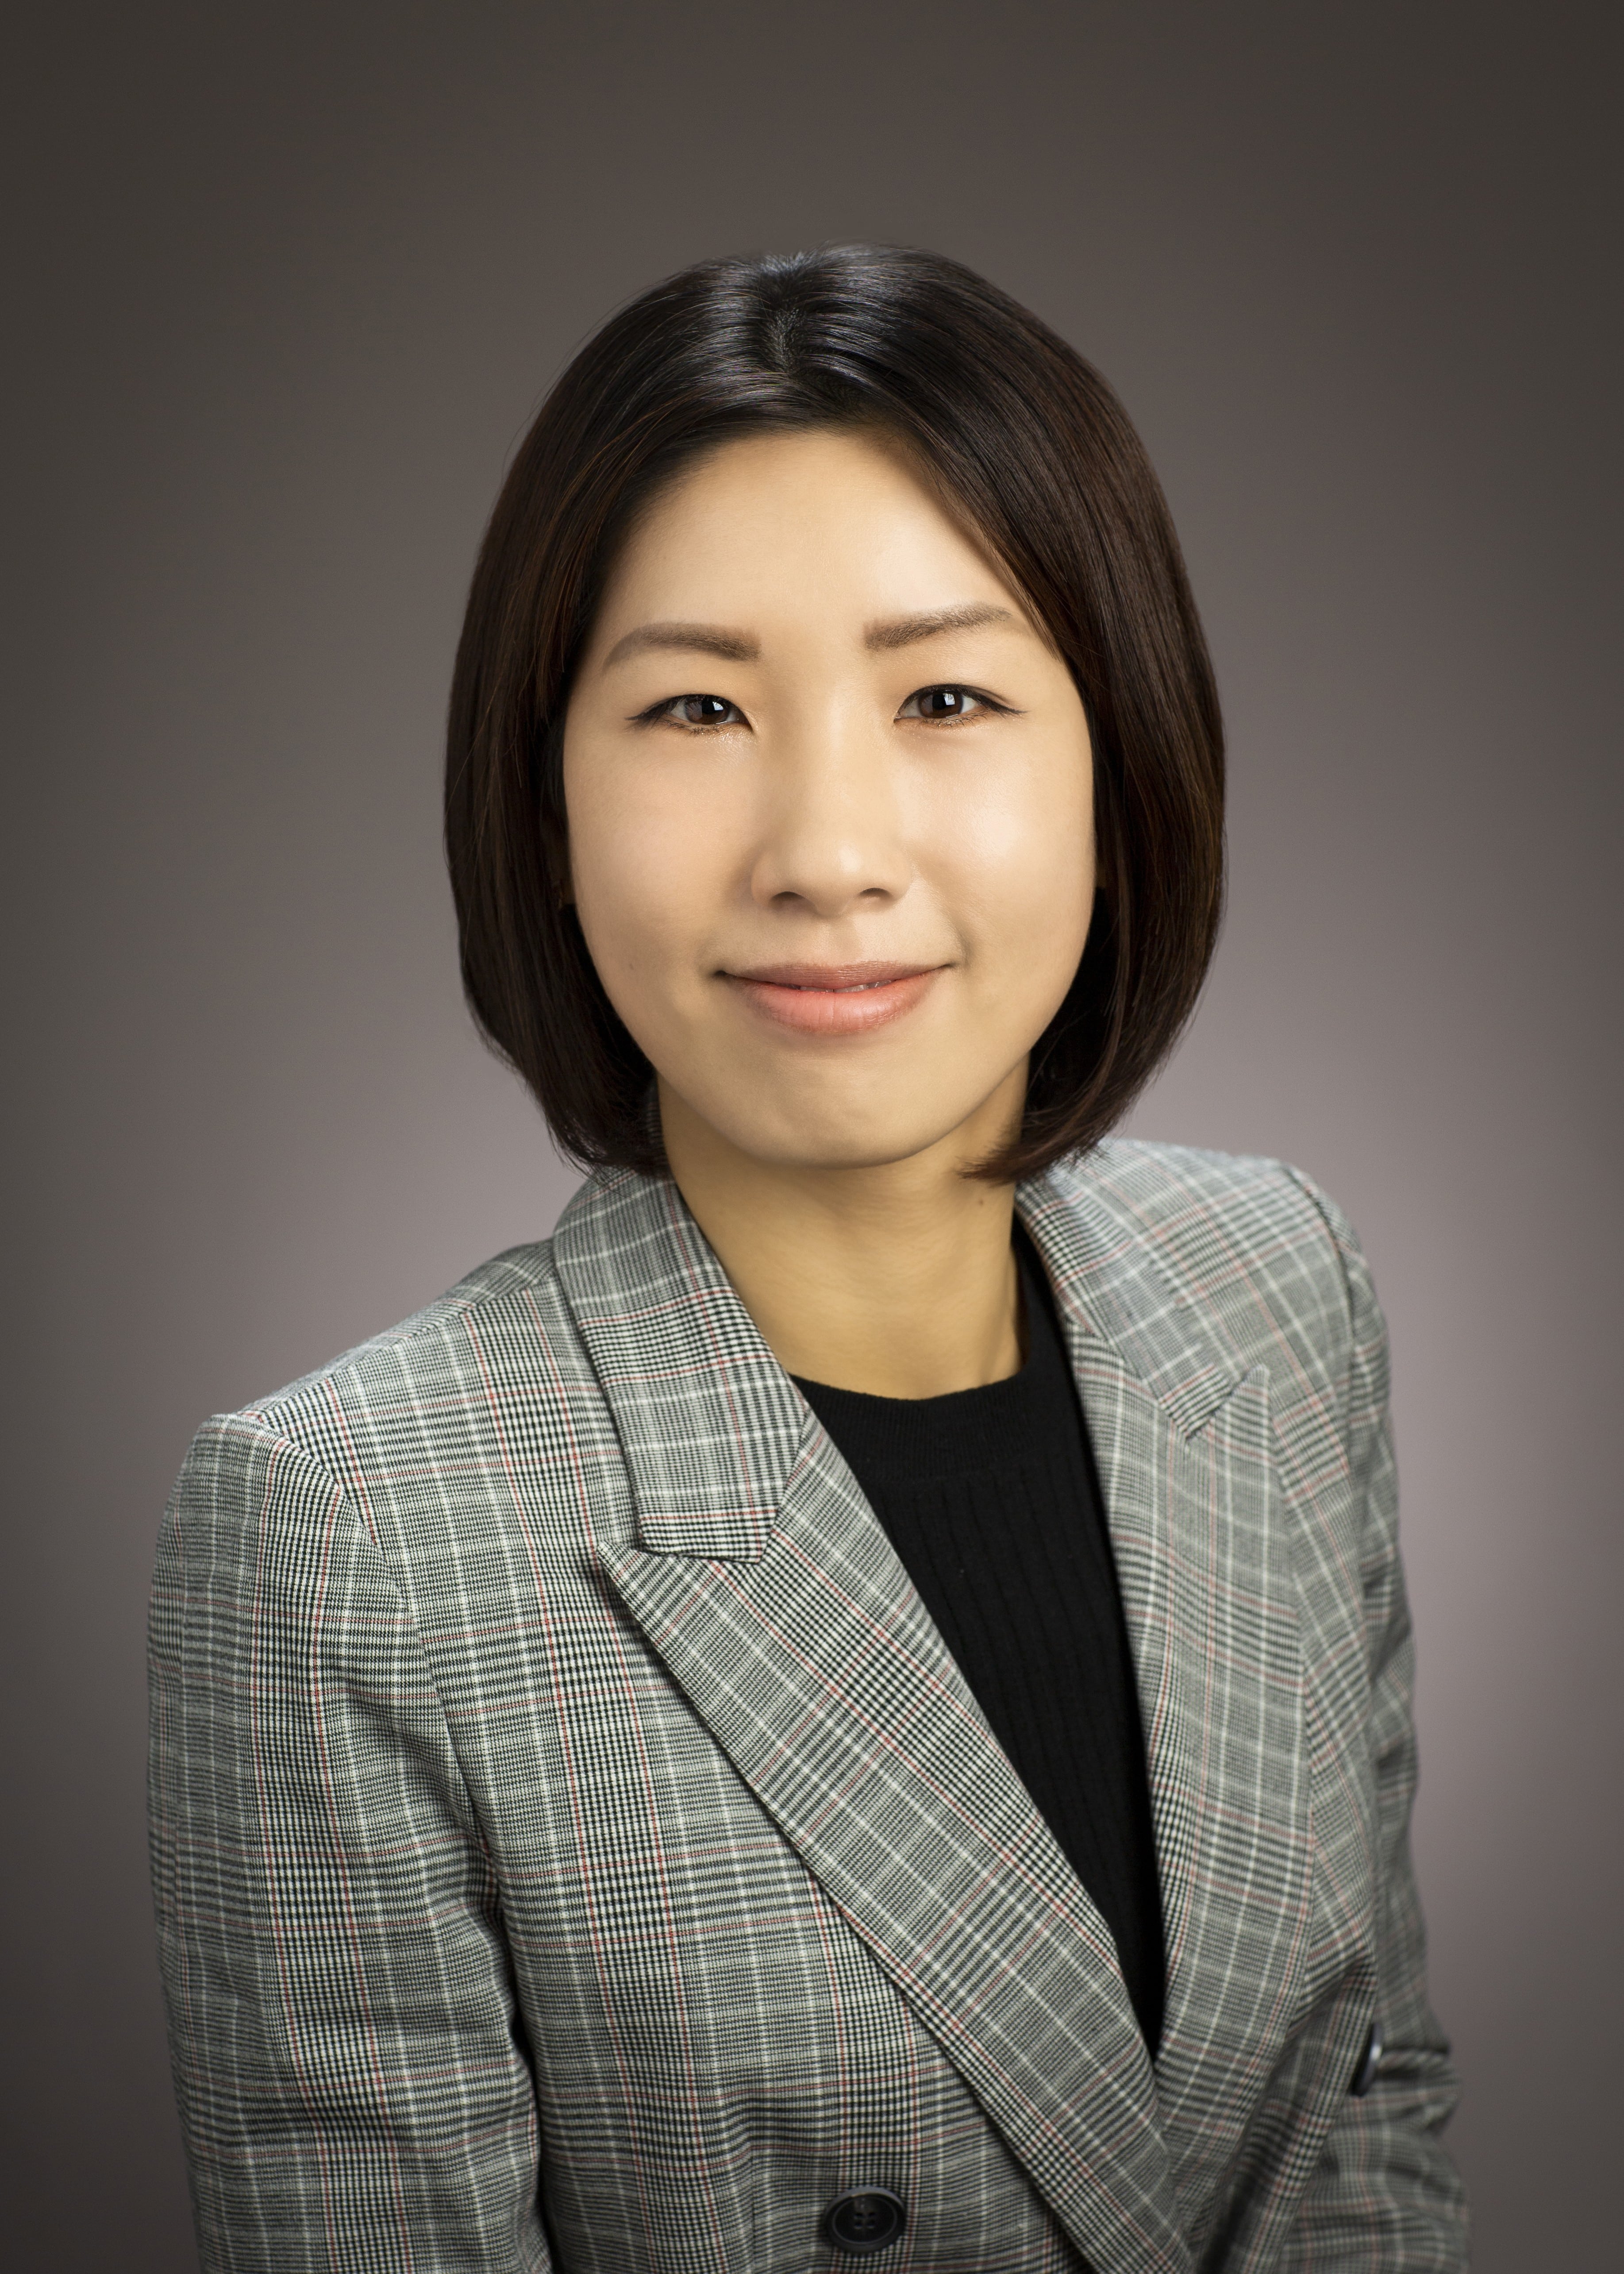 Soyoung Choi's directory photo.